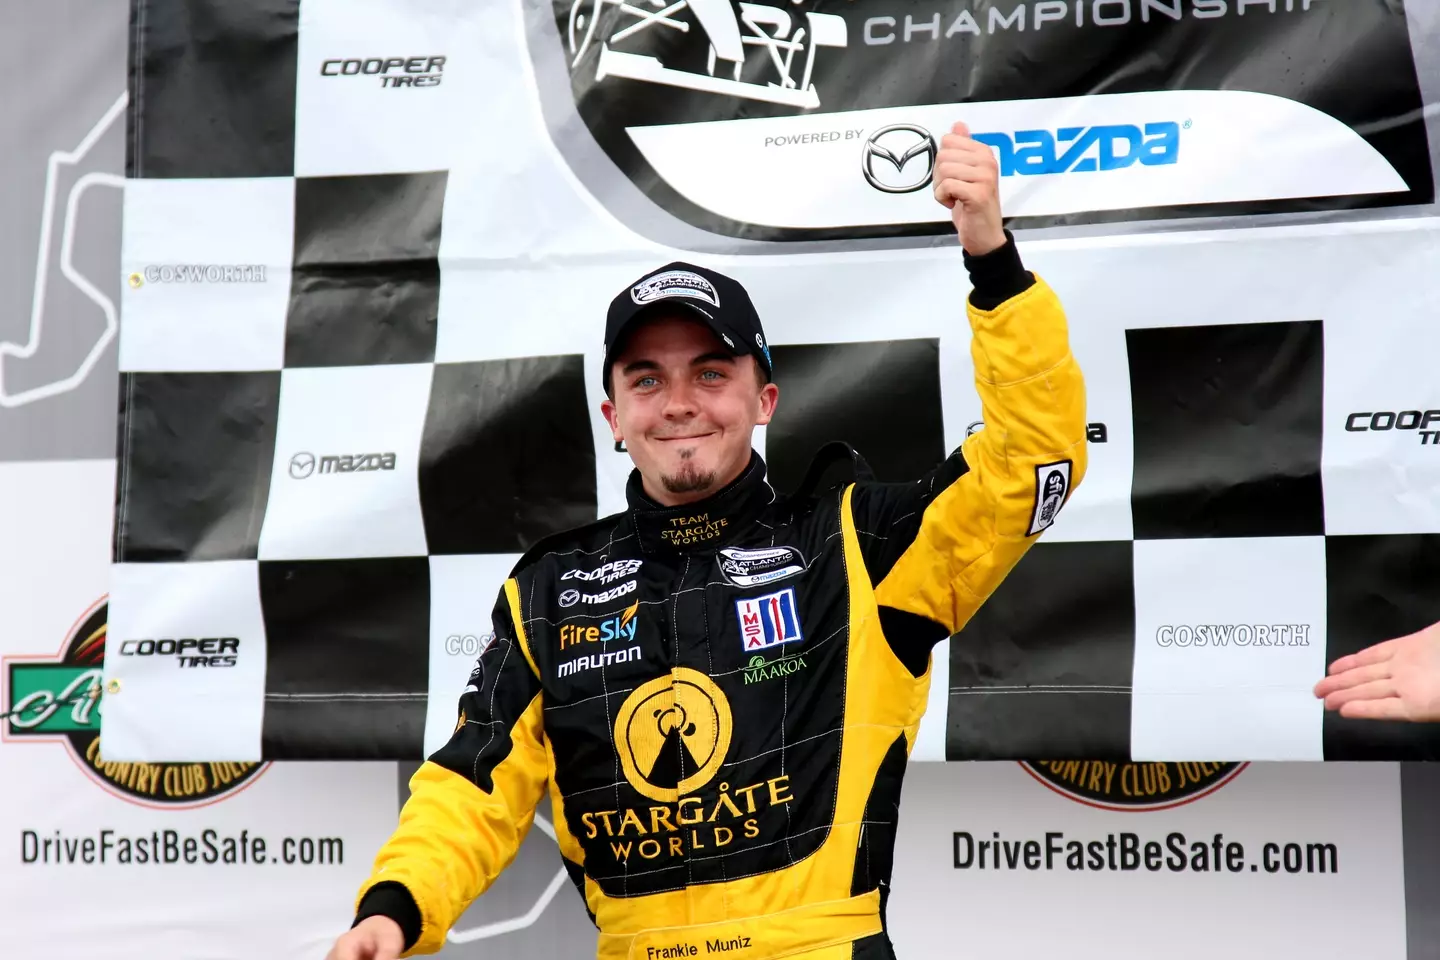 Frankie Muniz has been into racing for a while.